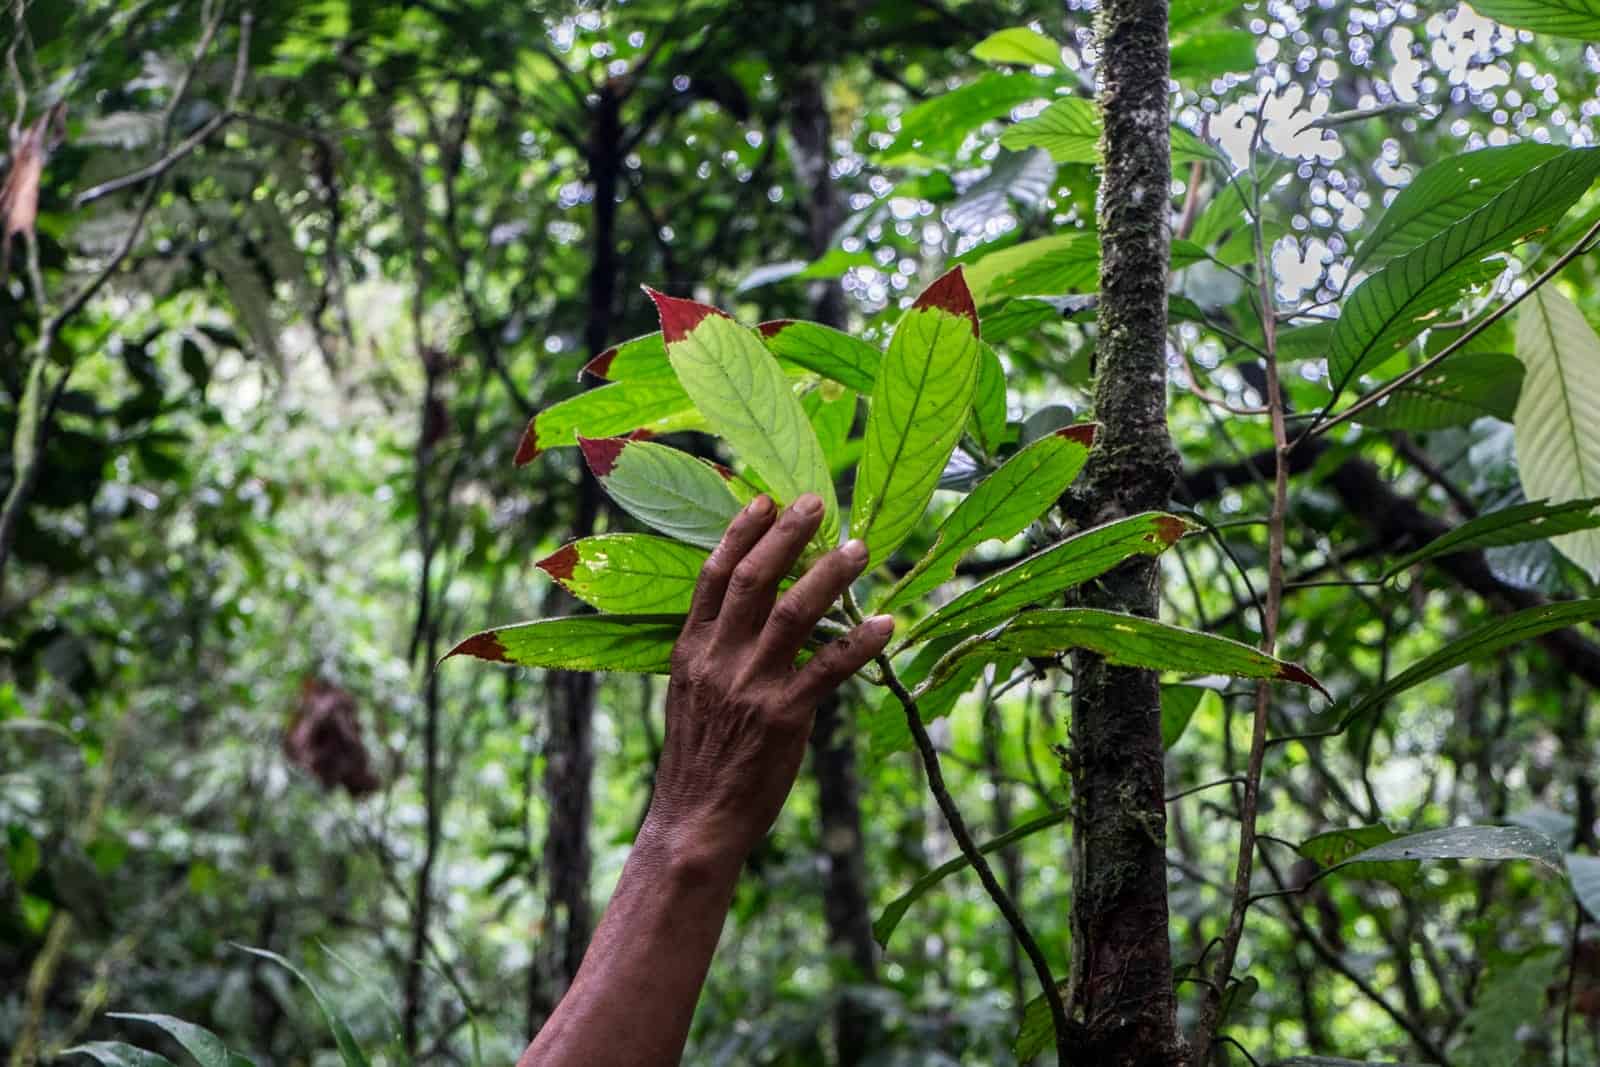 A hand touches a bunch of long green leaves with red tips - one of the unique plant species in the Ecuador Amazon Rainforest. 